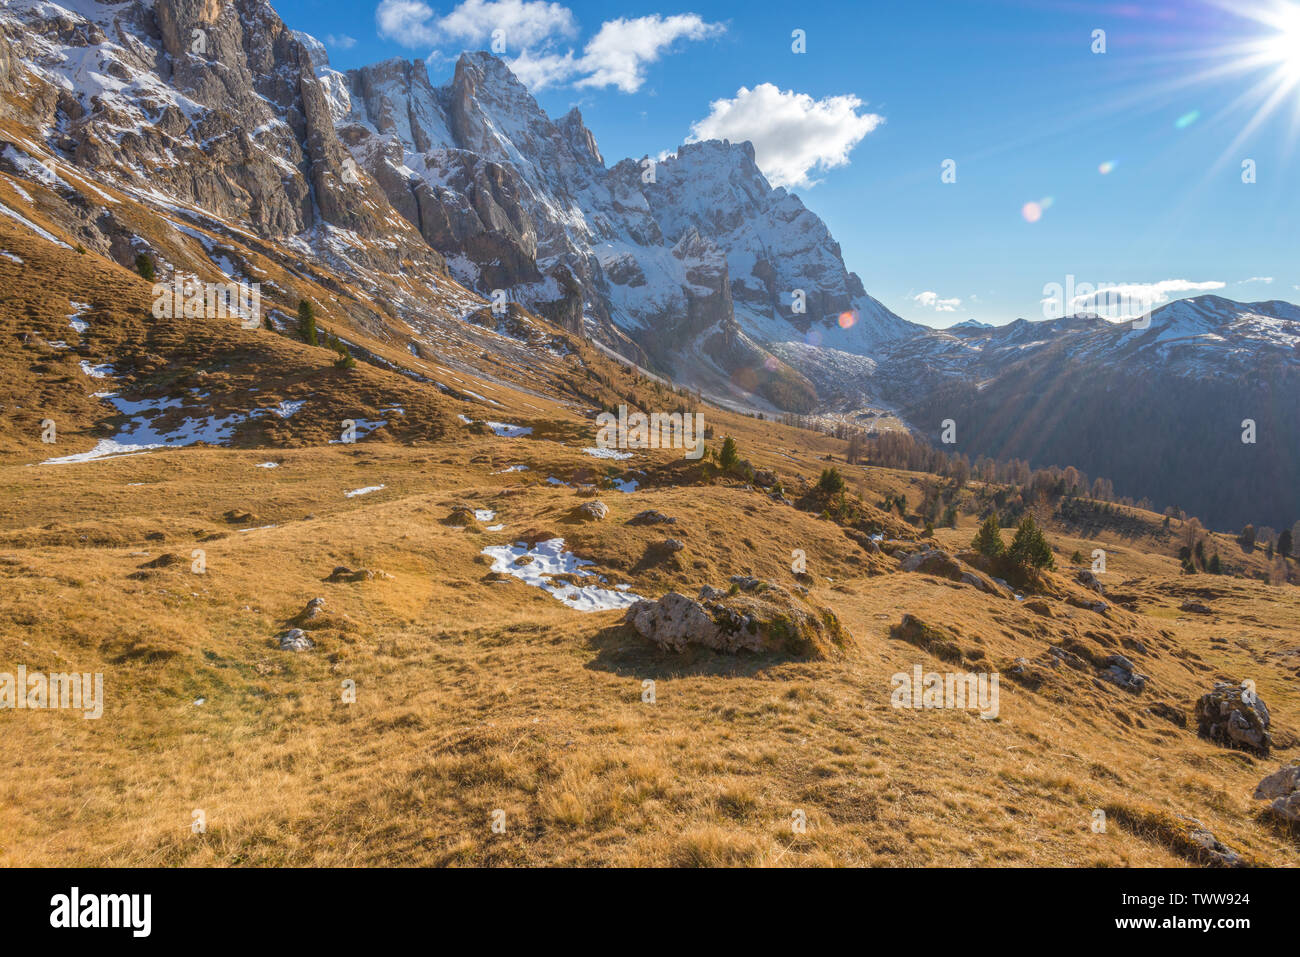 Pale di San Martino mountain range in Italy. Direct sunlight and sunrays hitting the alpine meadow in an autumn day. Fall colours in the mountains. Stock Photo